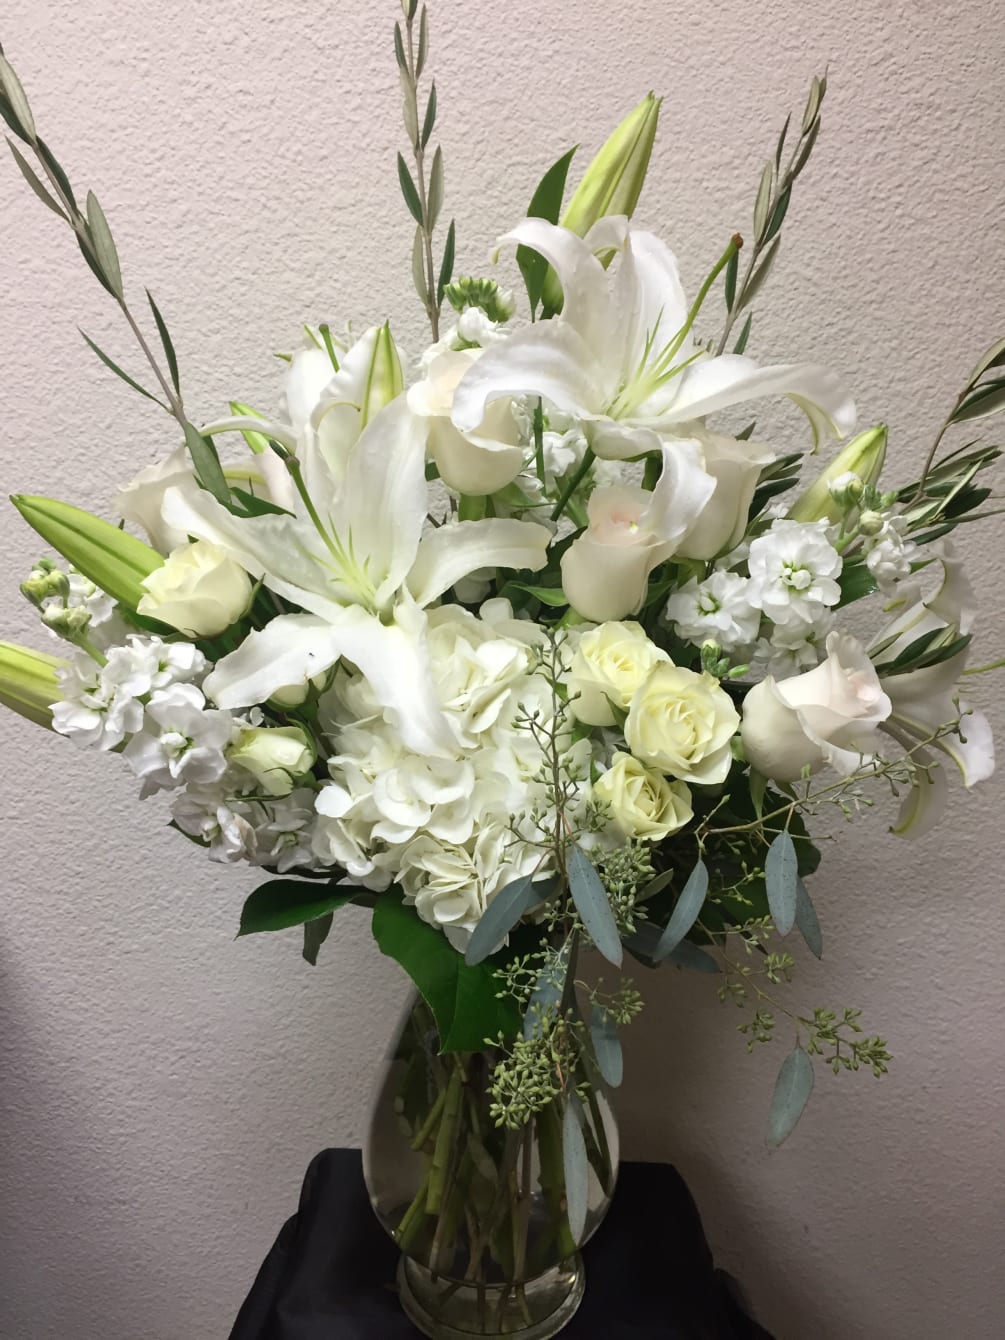 This snowy arrangement includes all-white Asiatic Lilies, Roses, Stock, Hydrangea, and Spray